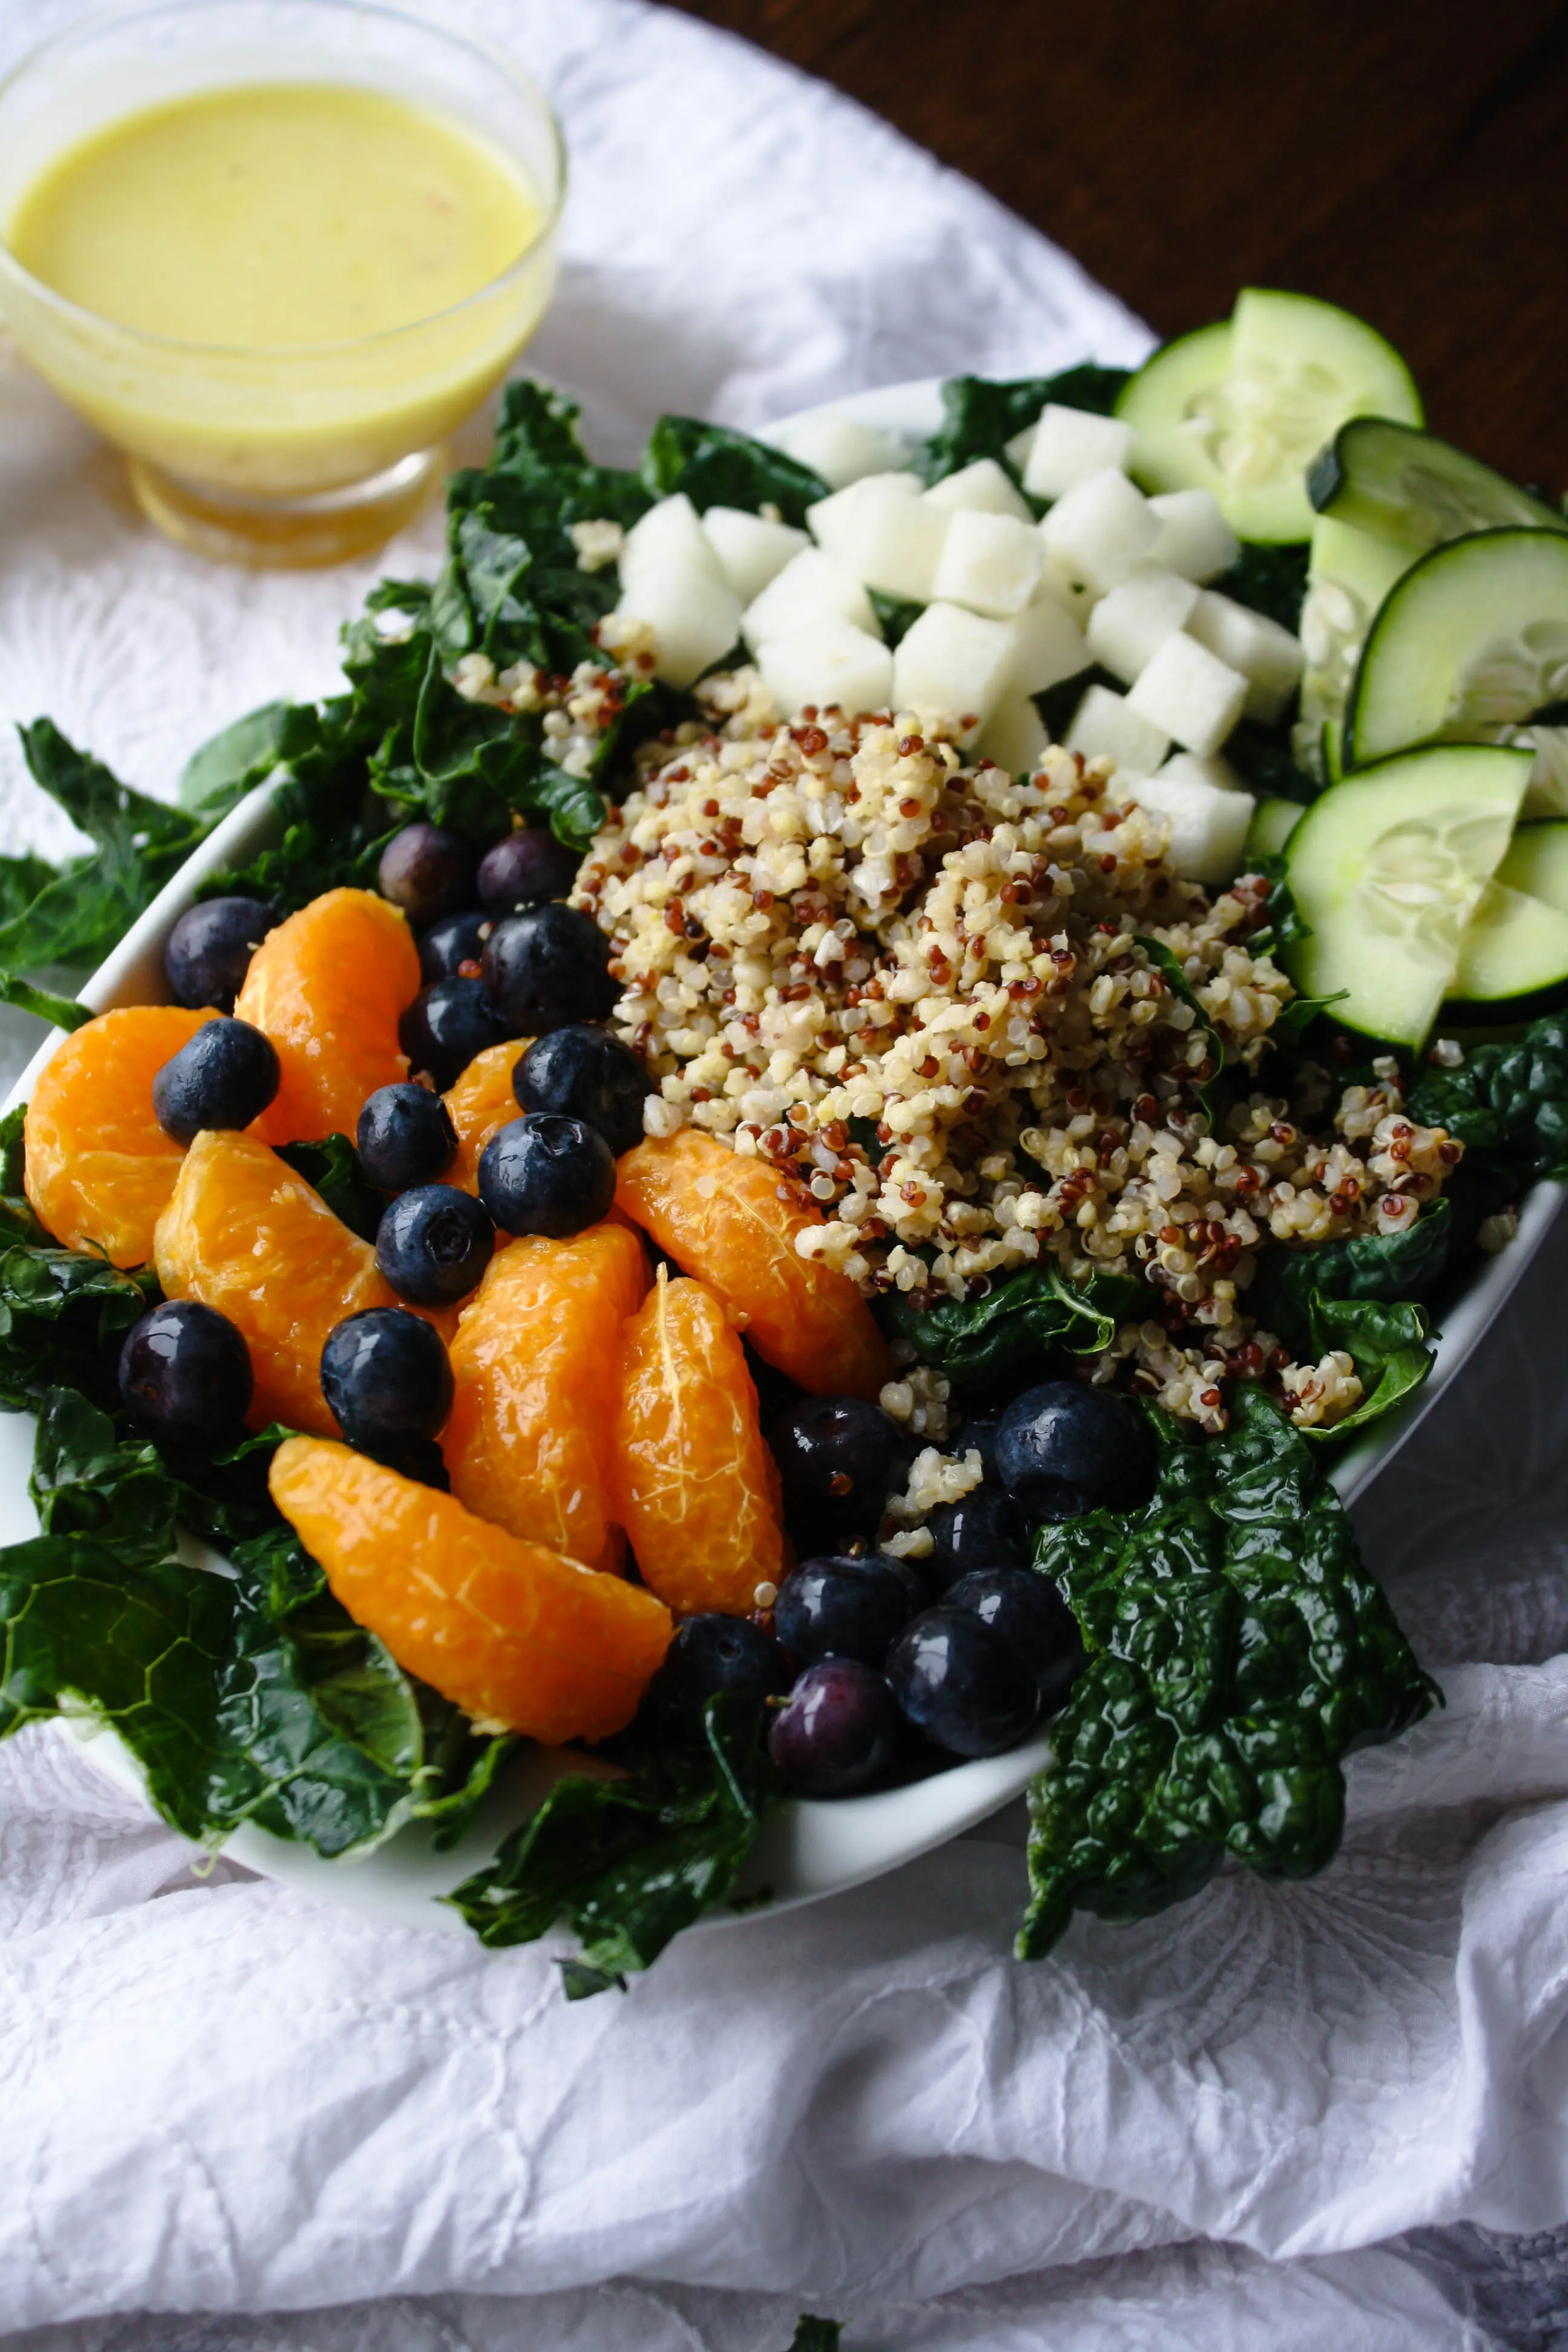 Kale-Quinoa Salad with Orange Vinaigrette makes a great meal. This salad is filling, delicious, and healthy!